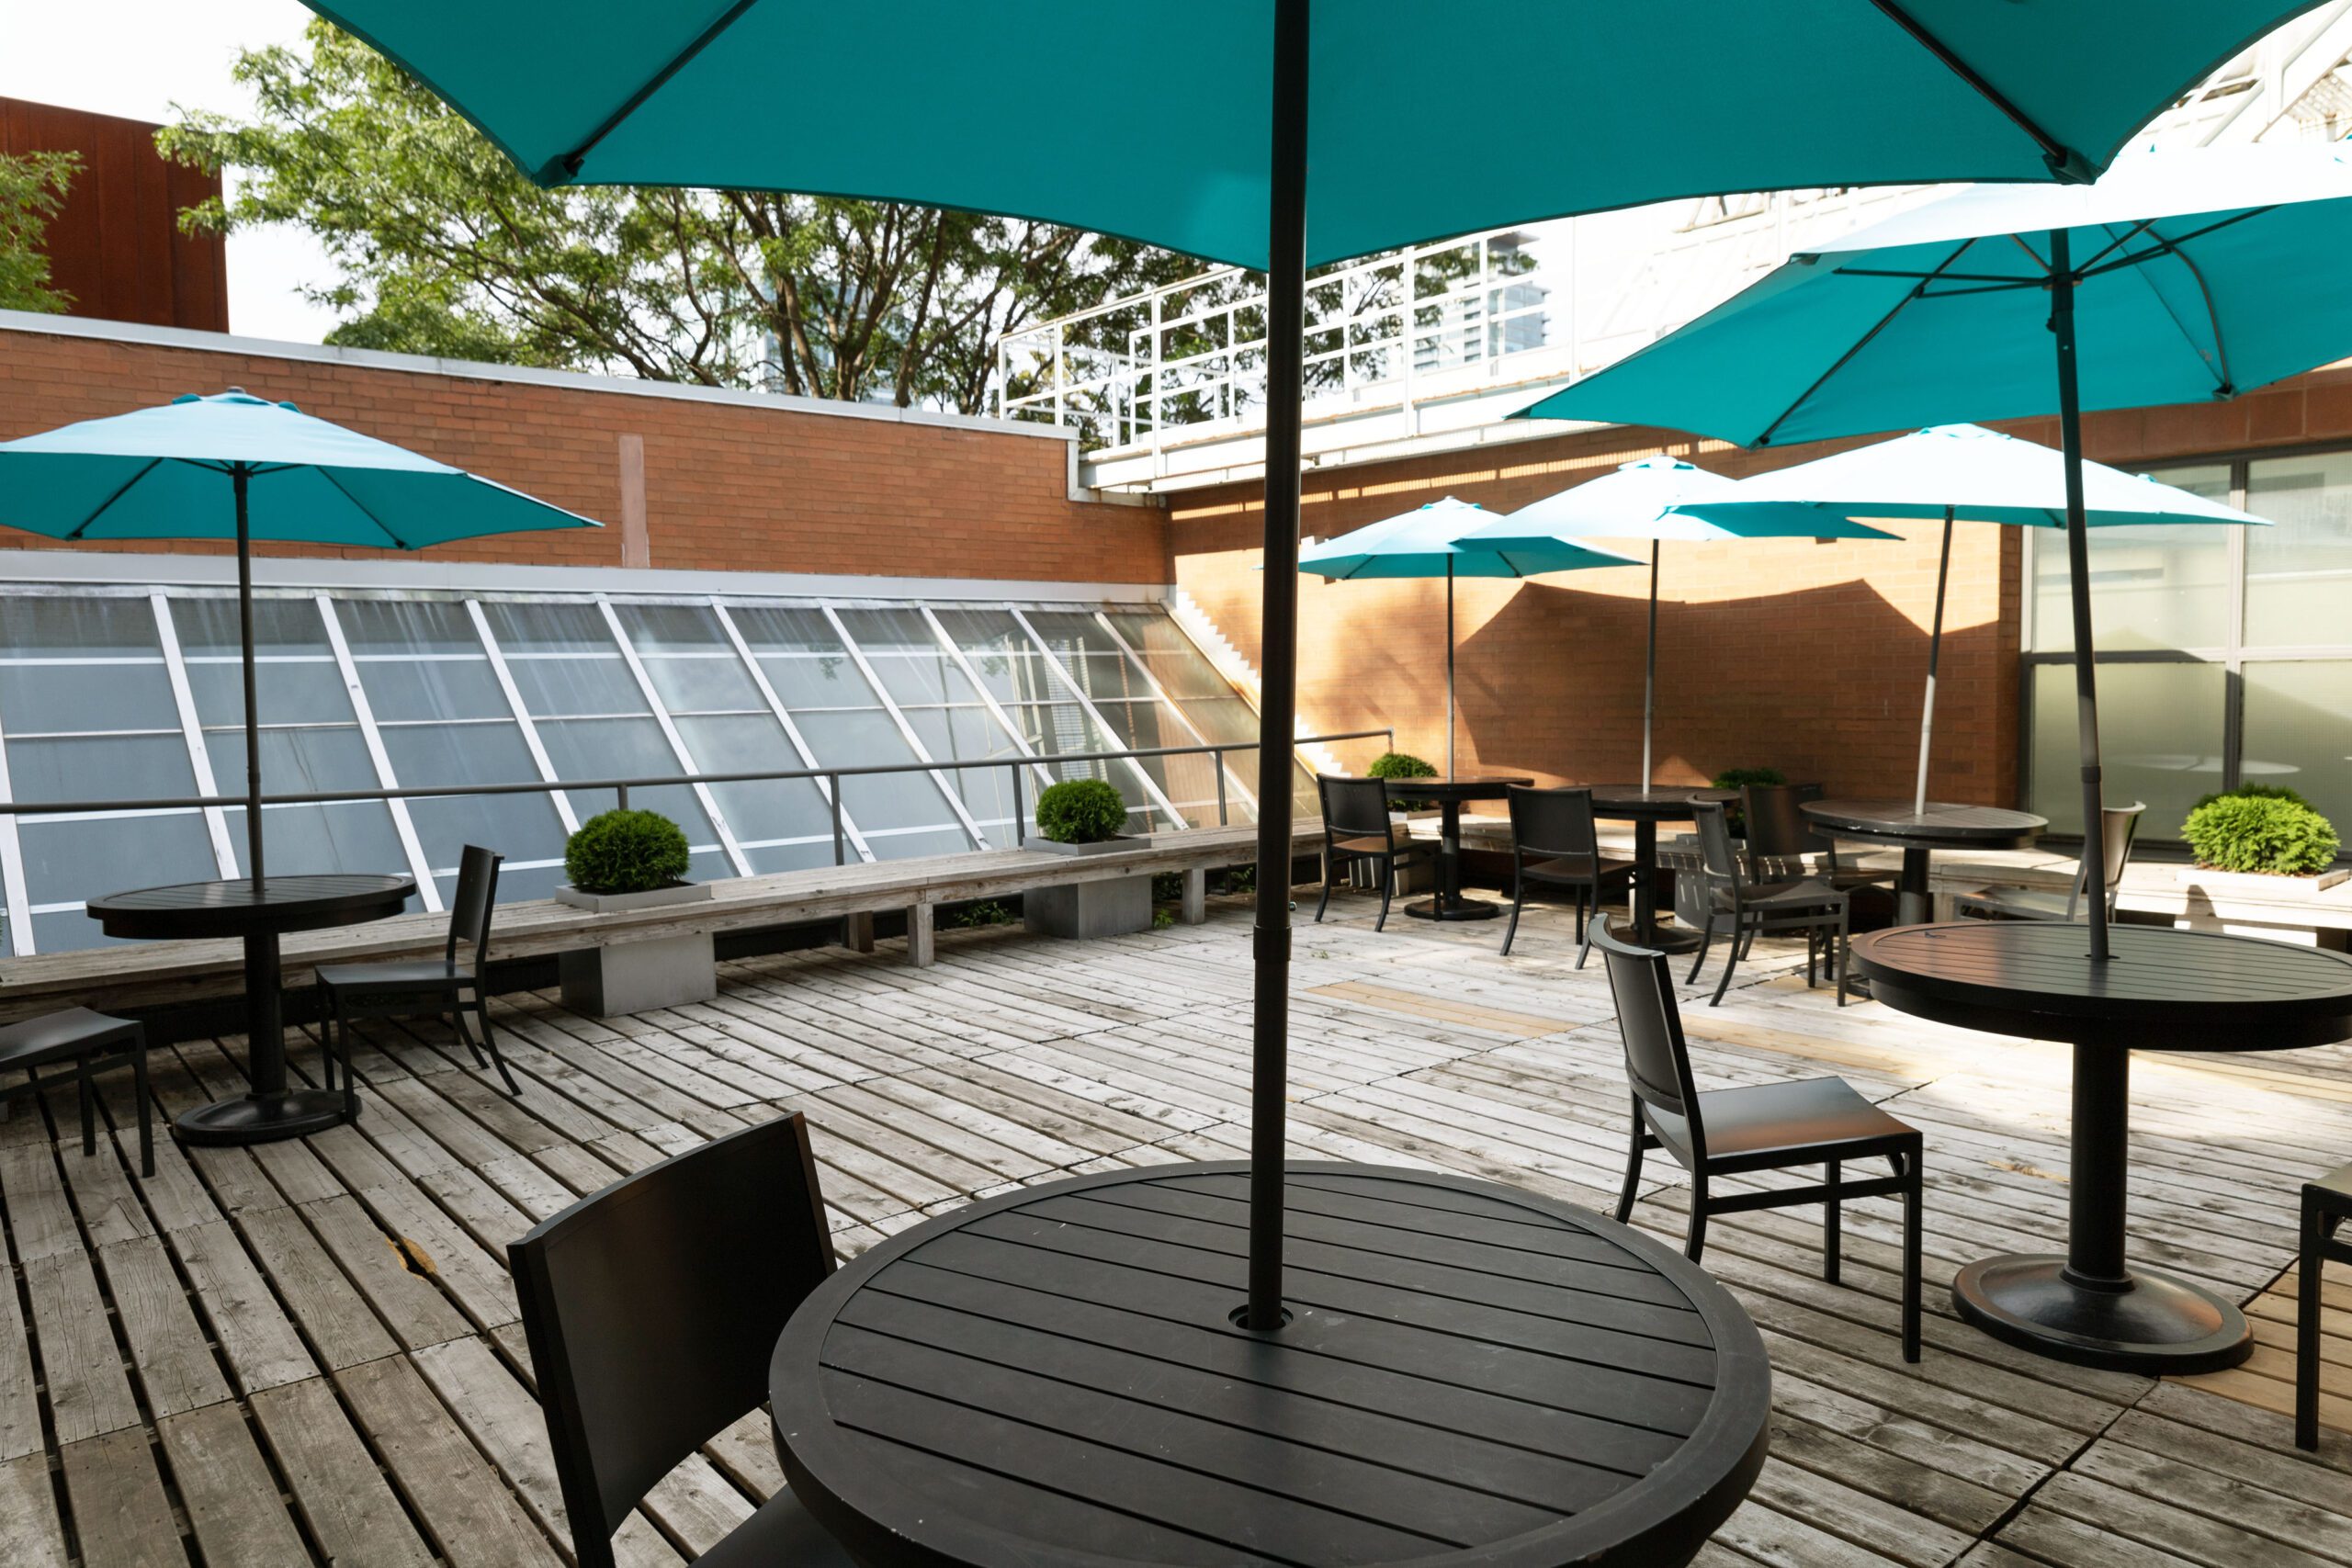 round patio tables with umbrellas and chairs furnish the innis rooftop patio